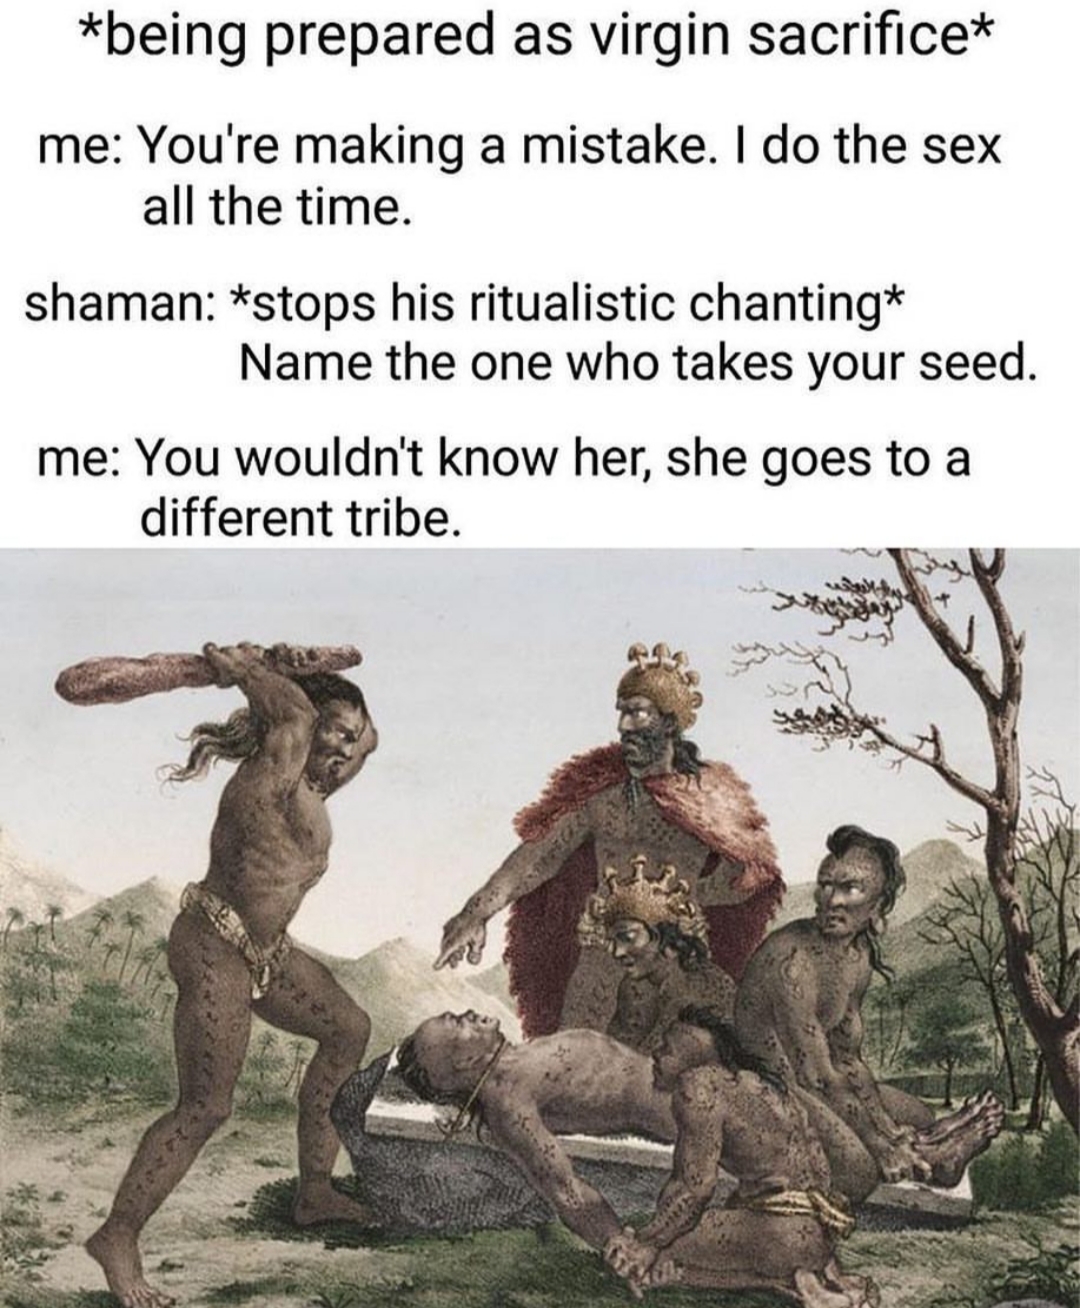 you wouldn t know her she goes - being prepared as virgin sacrifice me You're making a mistake. I do the sex all the time. shaman stops his ritualistic chanting Name the one who takes your seed. me You wouldn't know her, she goes to a different tribe.